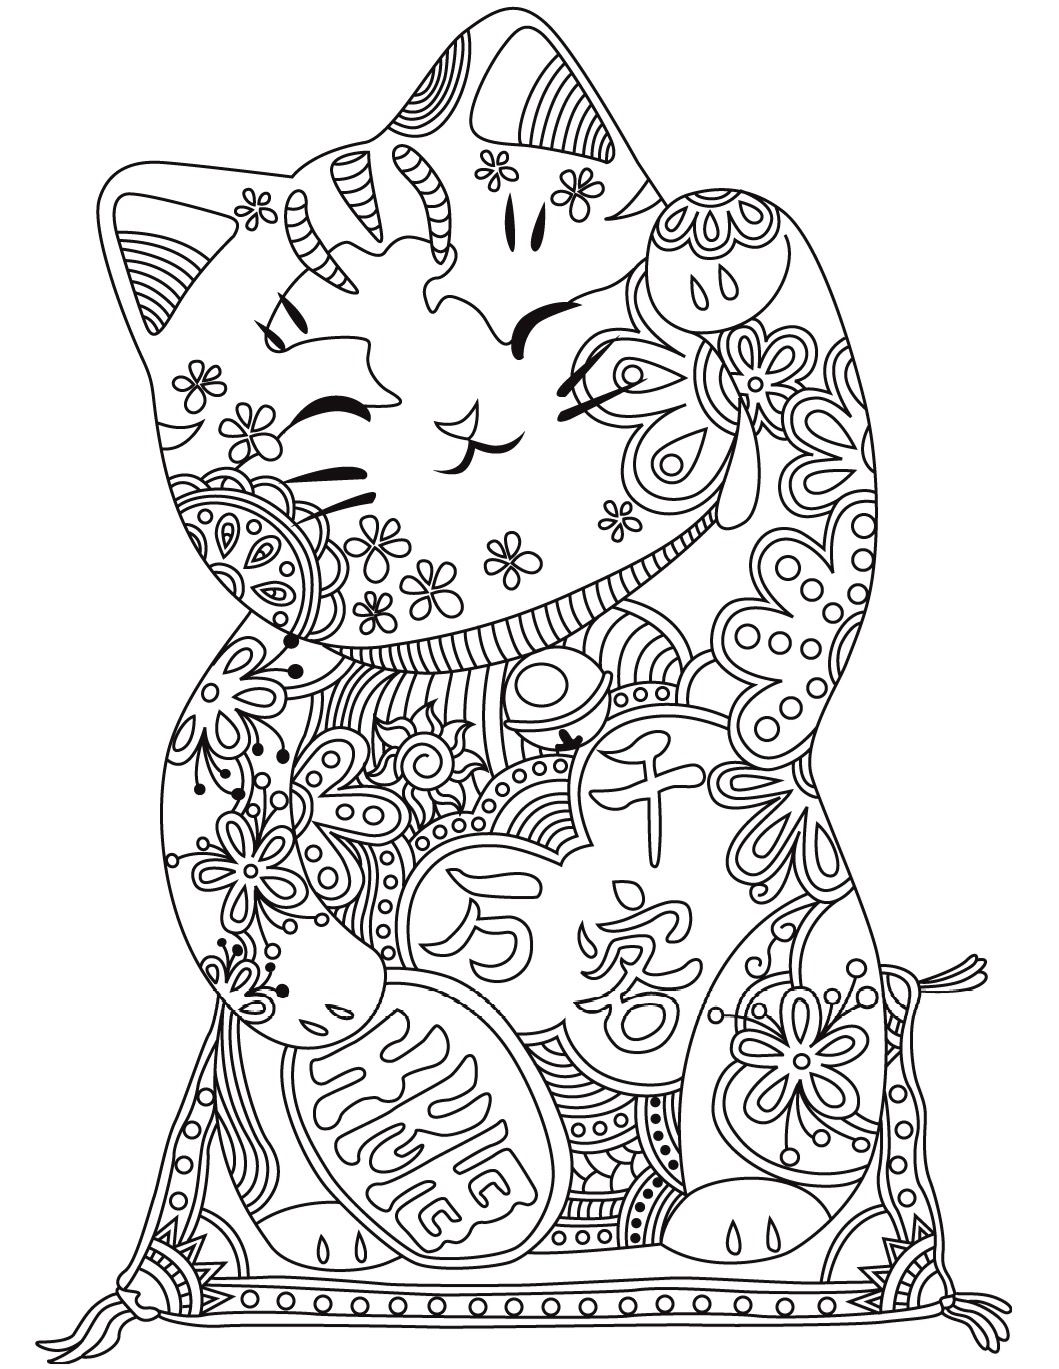 970 Top Cat Coloring Pages For Adults Free For Free